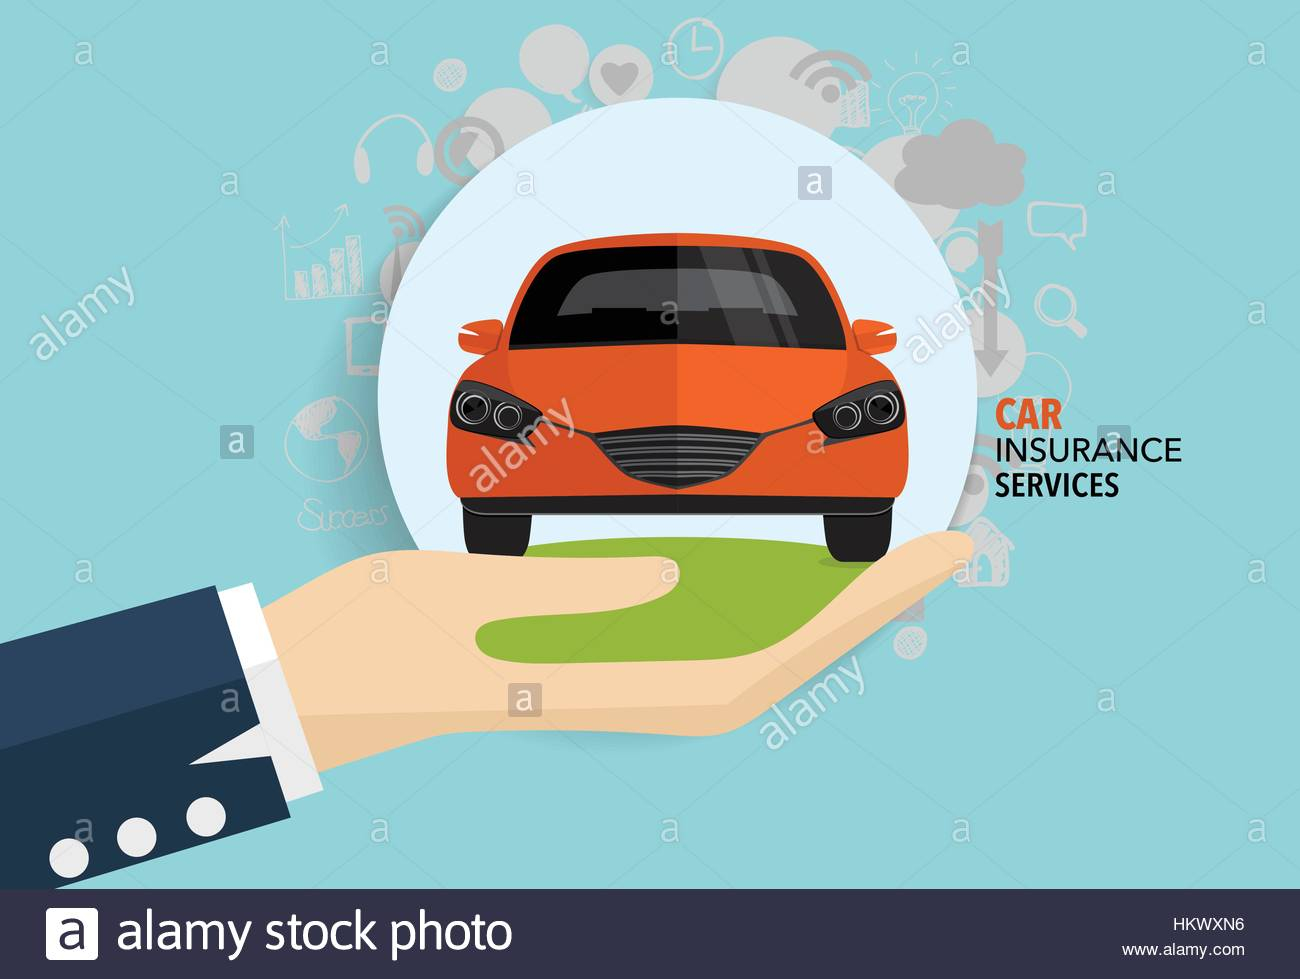 Car Insurance Business Service Vector Illustration Concept throughout dimensions 1300 X 979